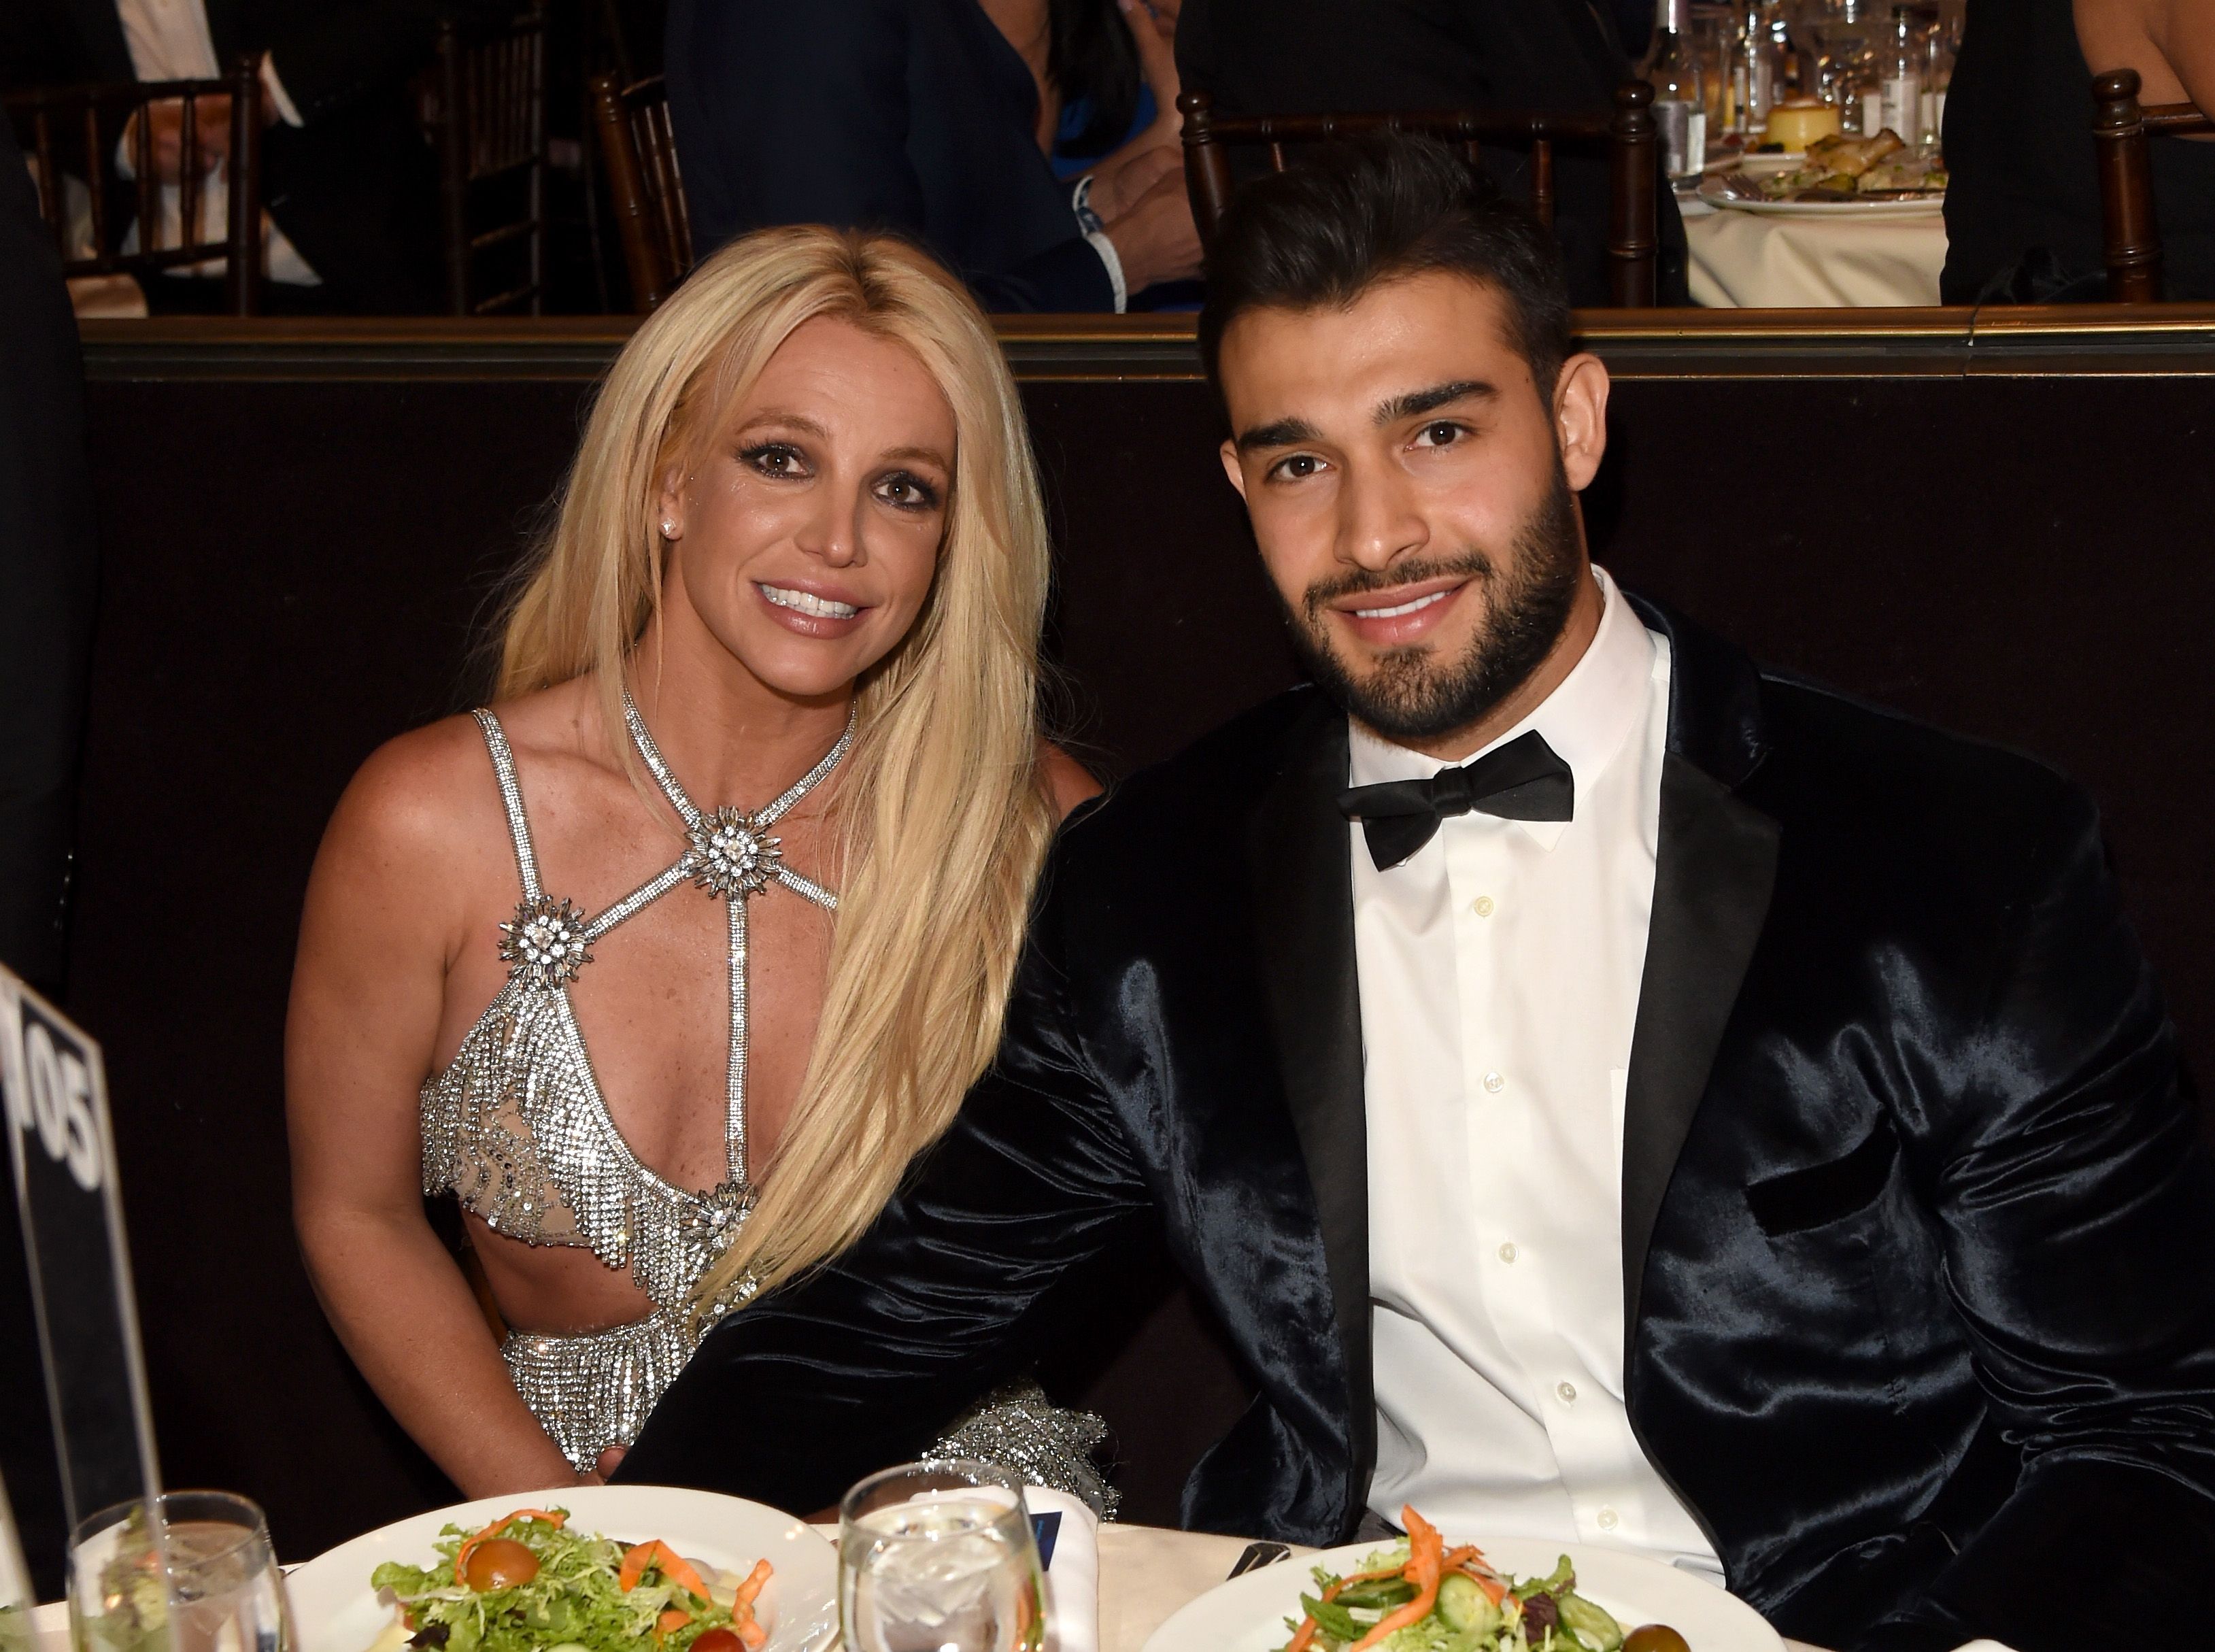 Honoree Britney Spears (L) and Sam Asghari at the 29th Annual GLAAD Media Awards at The Beverly Hilton Hotel on April 12, 2018 | 